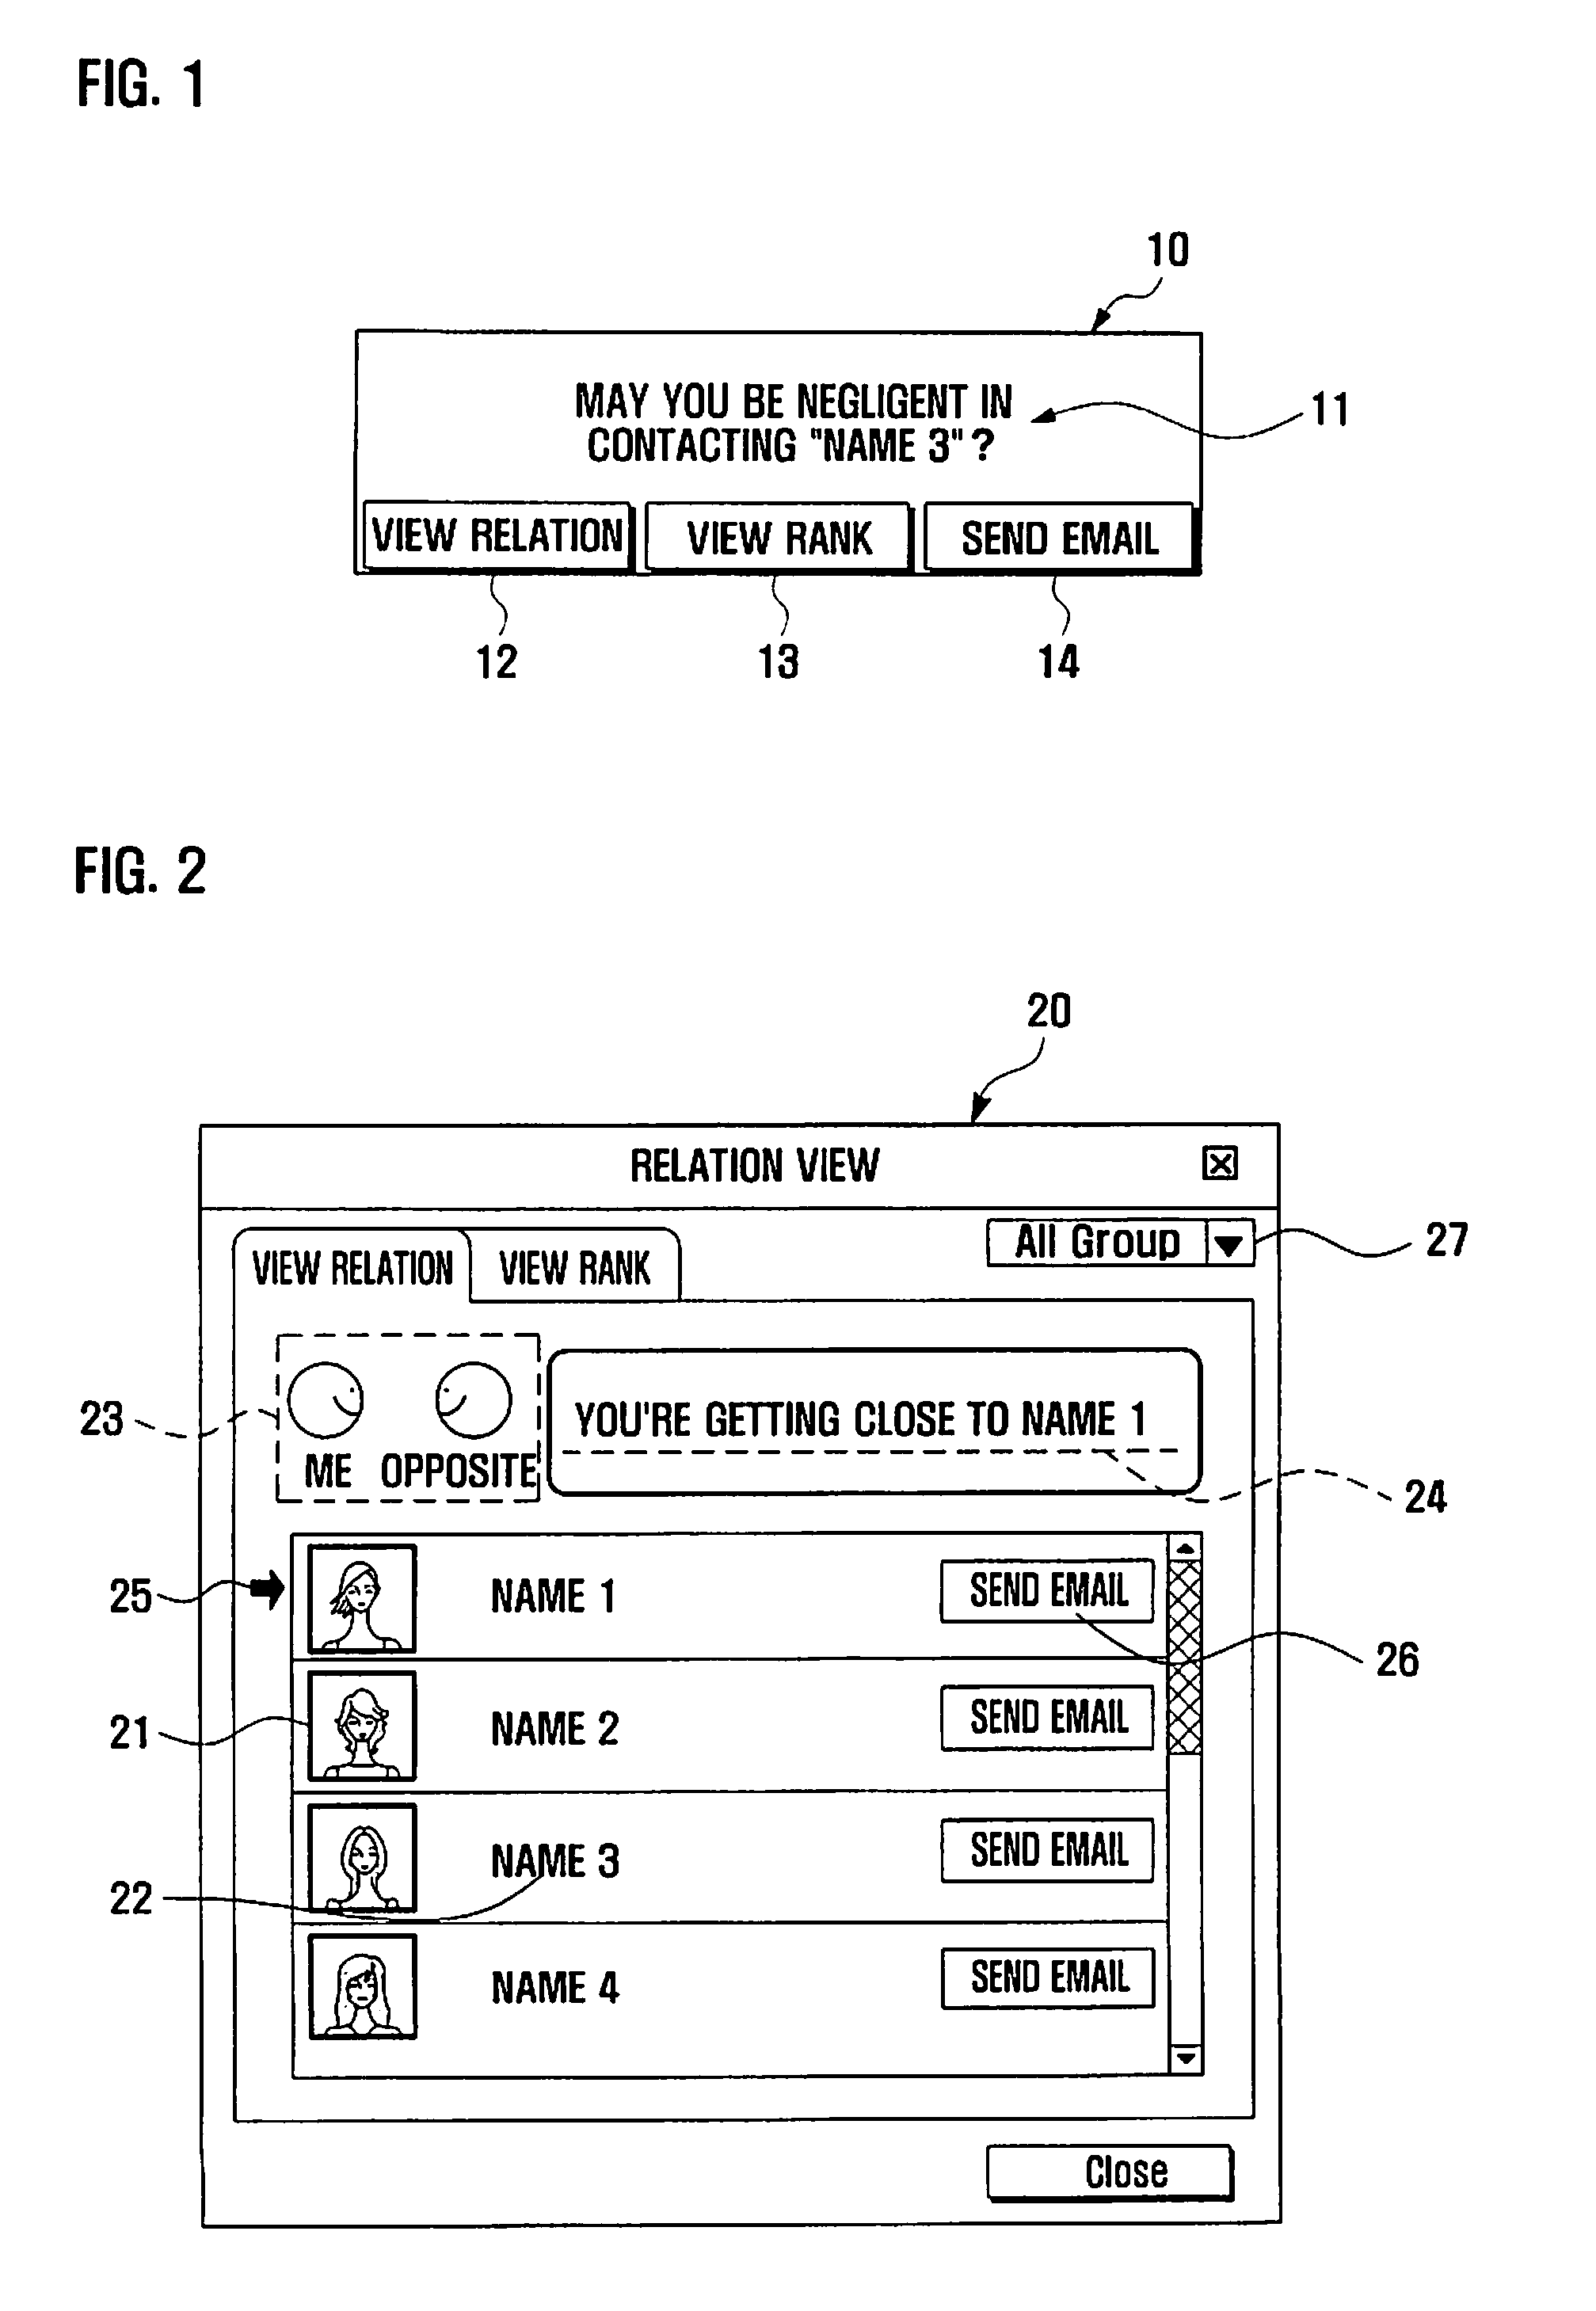 Method and apparatus for providing information on human relations based on analysis of log data in mobile communication terminal